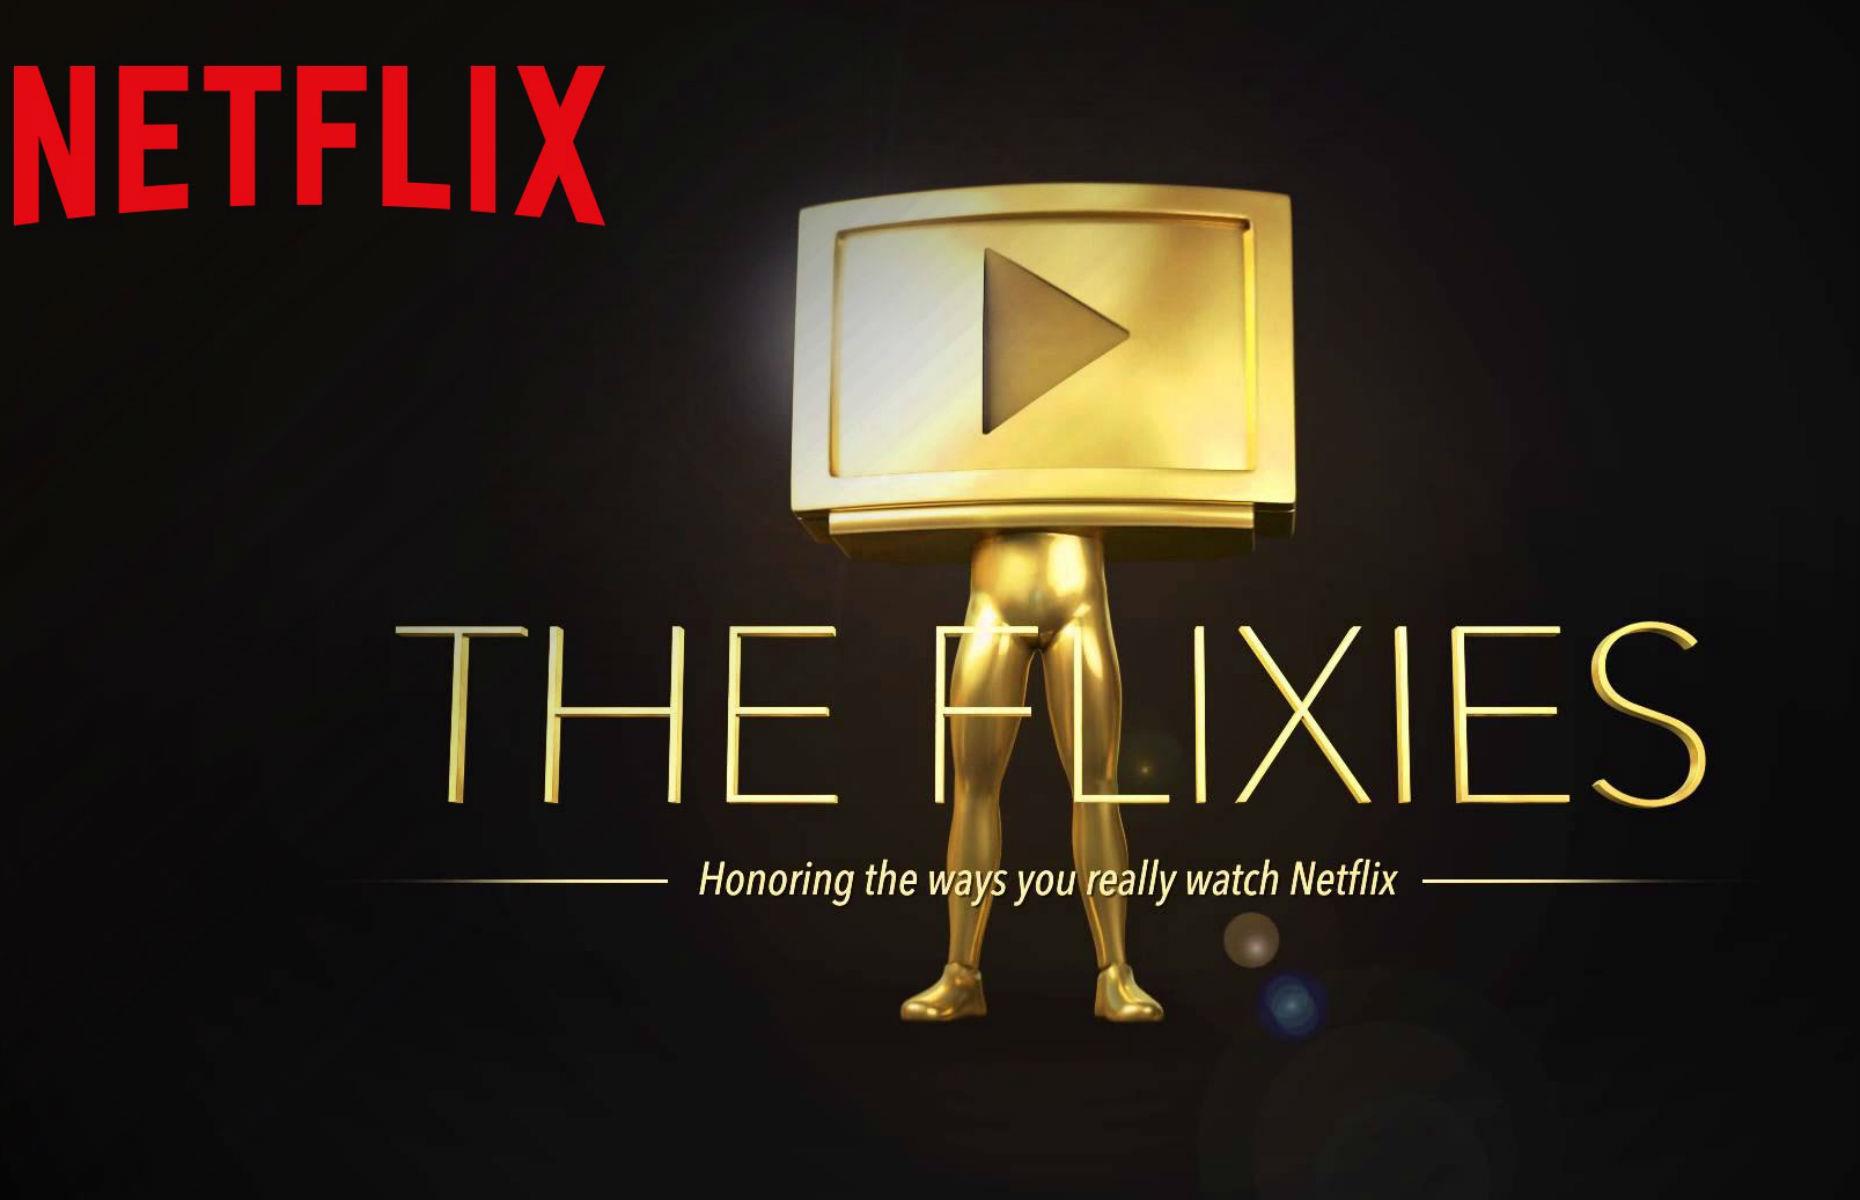 Netflix launched its own award show in 2013